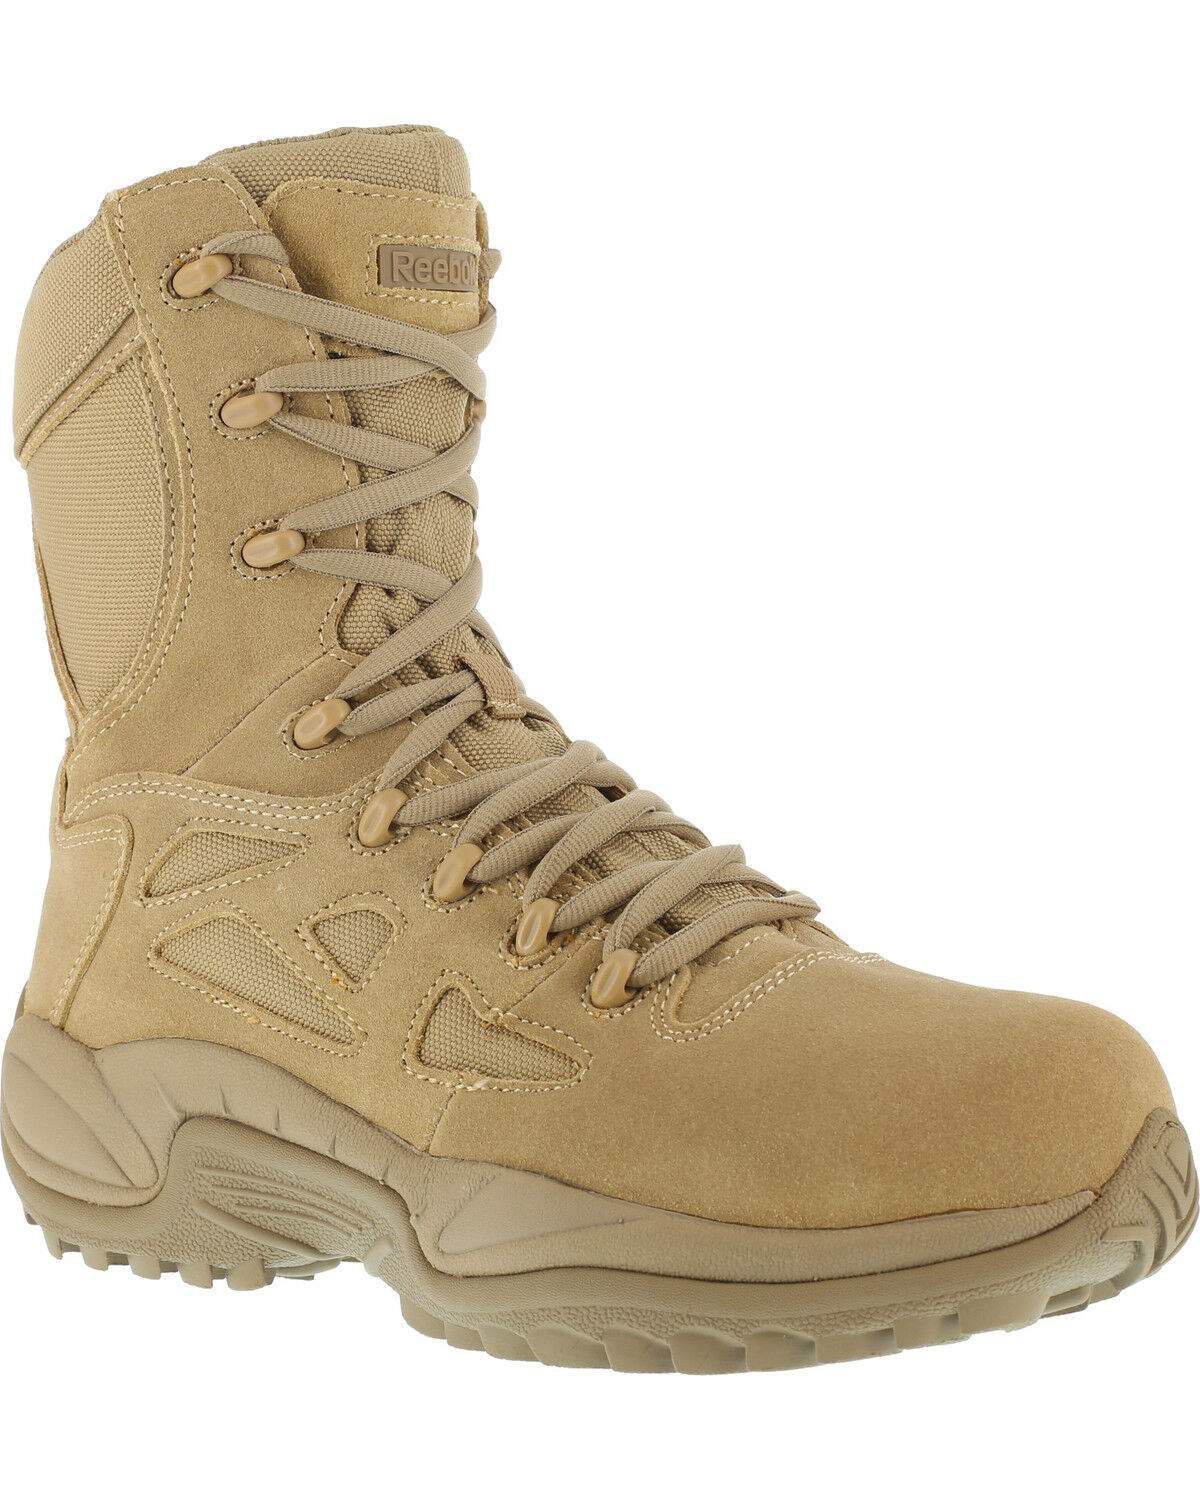 where to buy reebok work boots